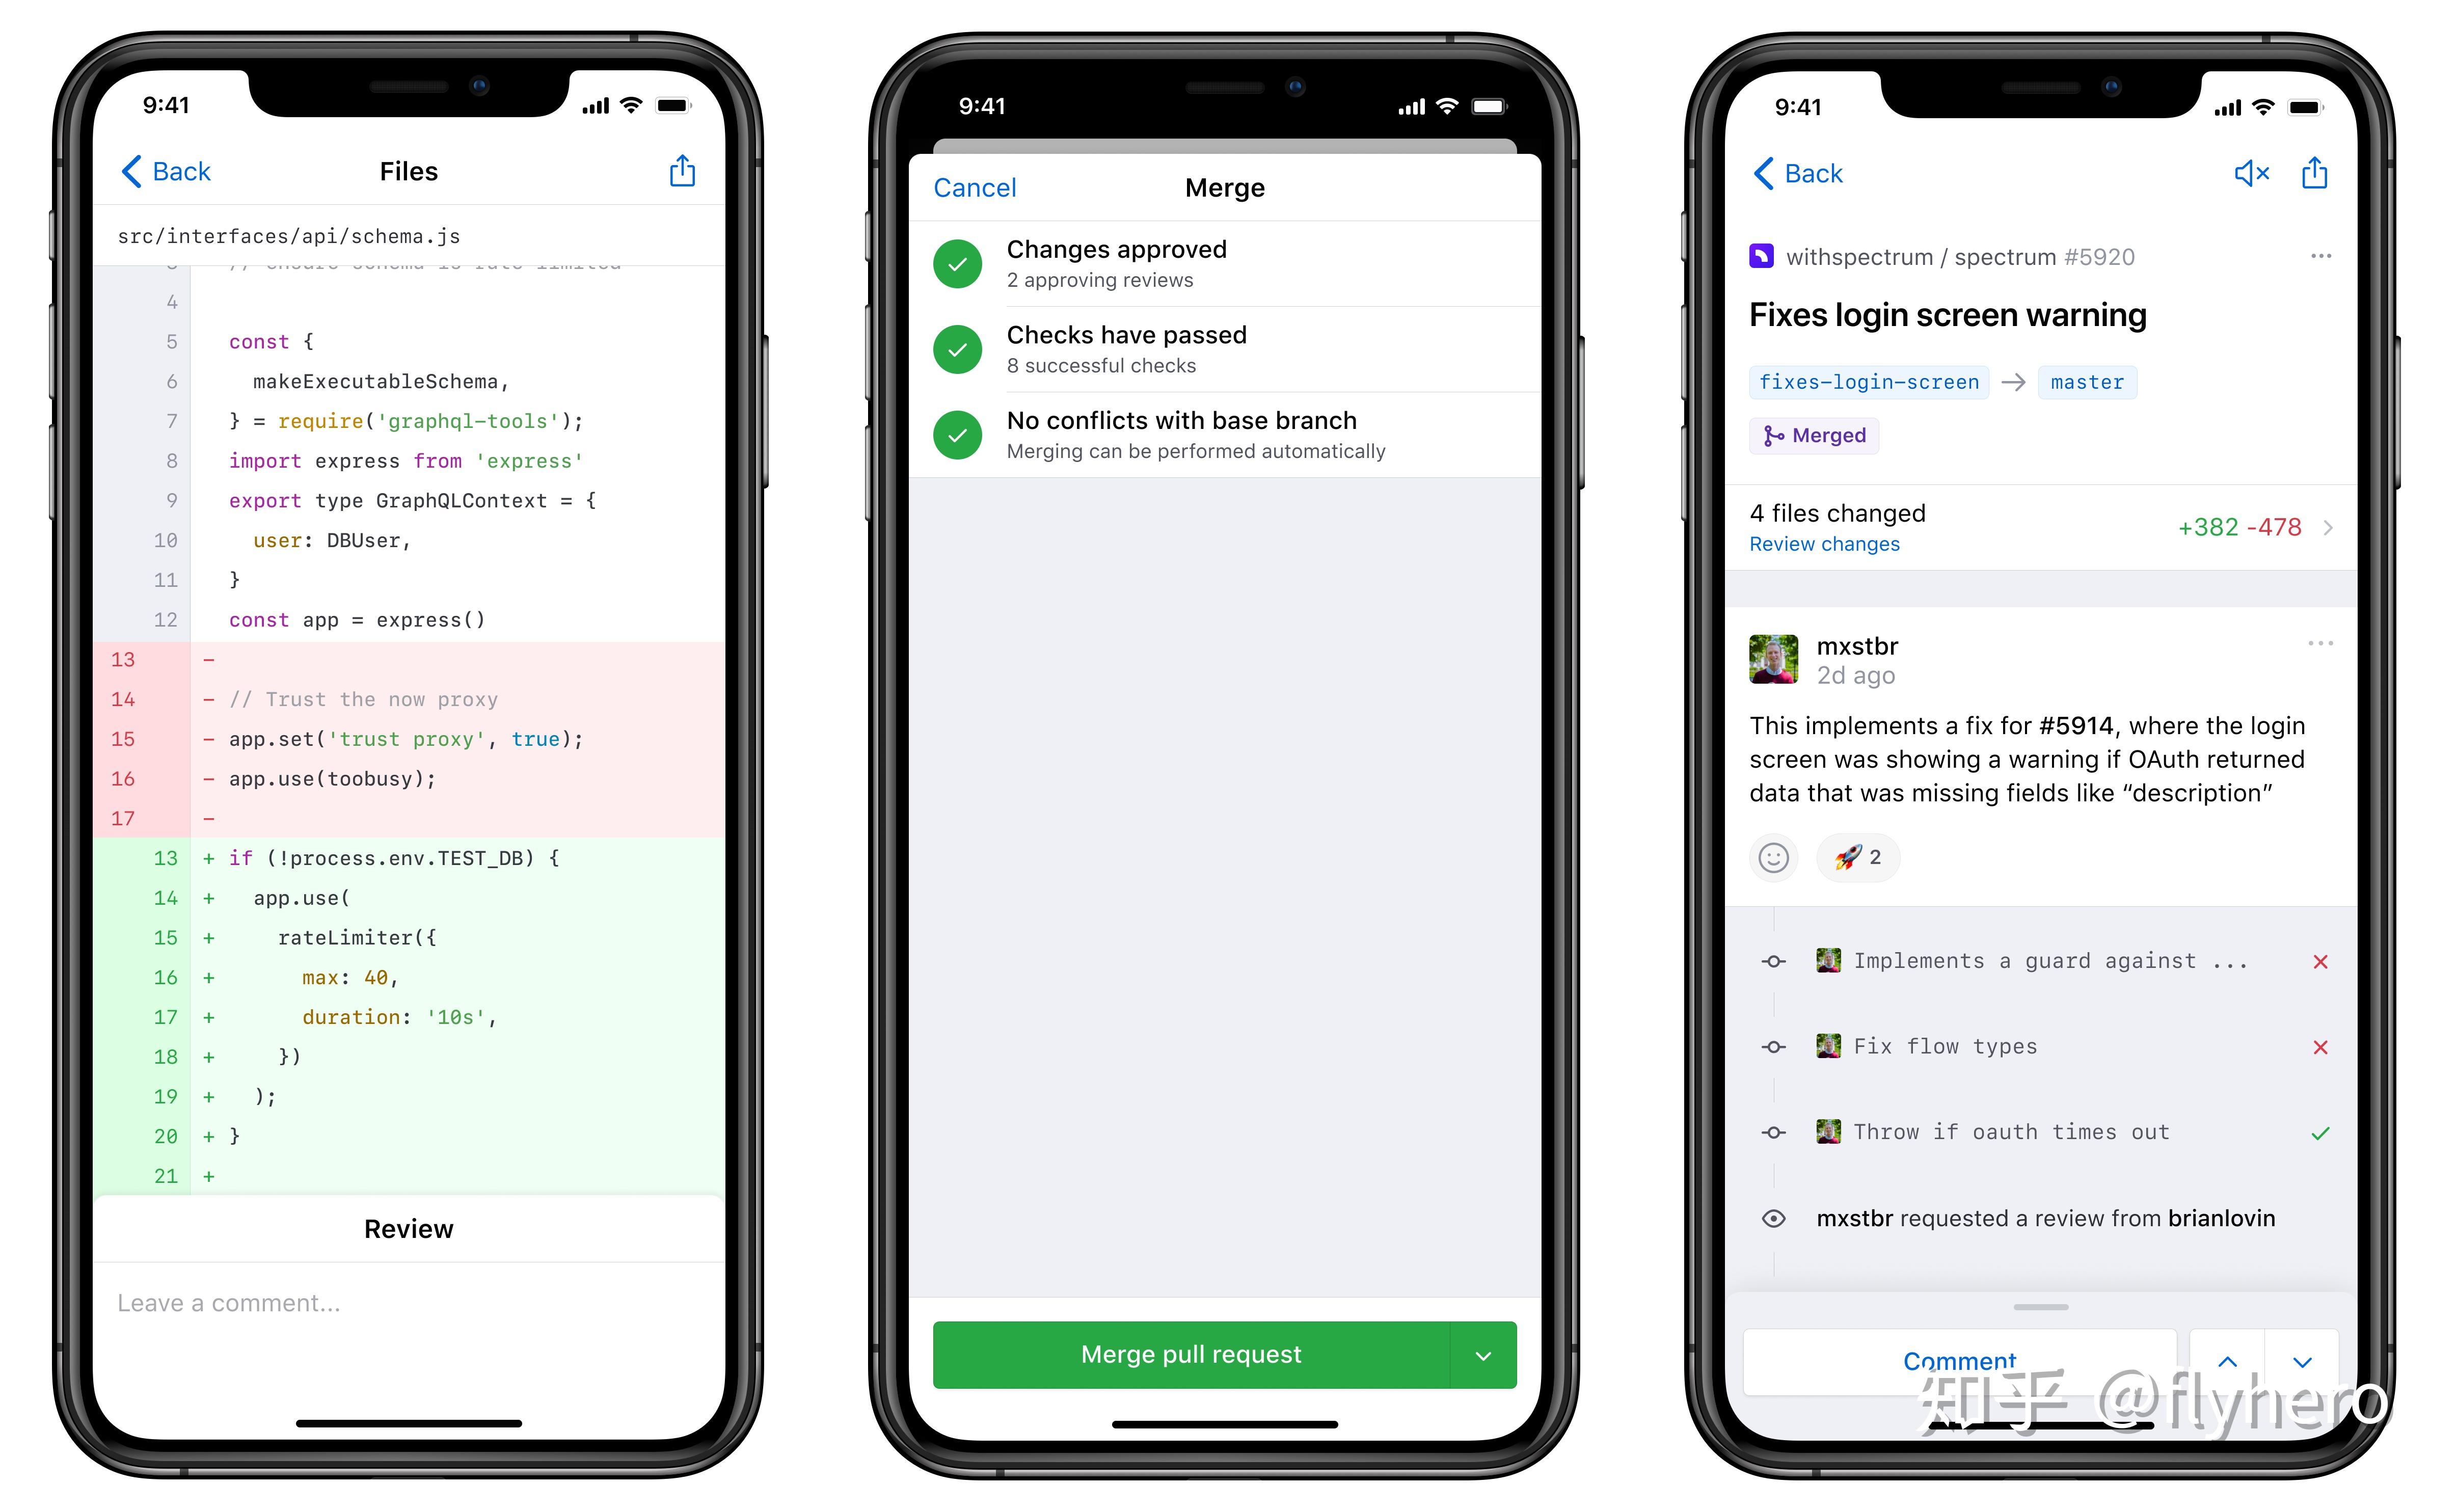 Official GitHub app updates on iOS and Android devices with new ...